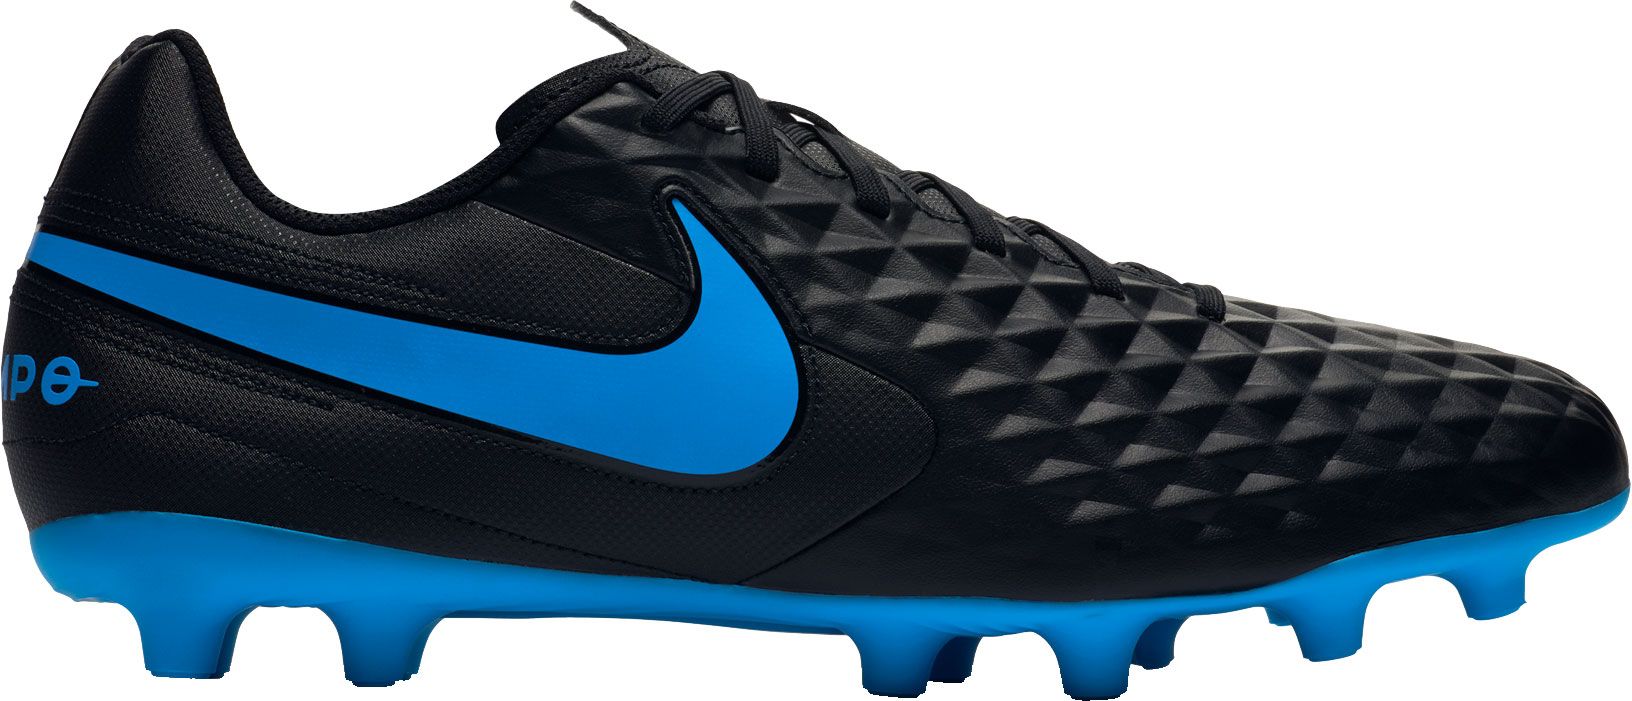 Nike Tiempo Legend 8 Club FG Soccer Cleats | DICK'S Sporting Goods